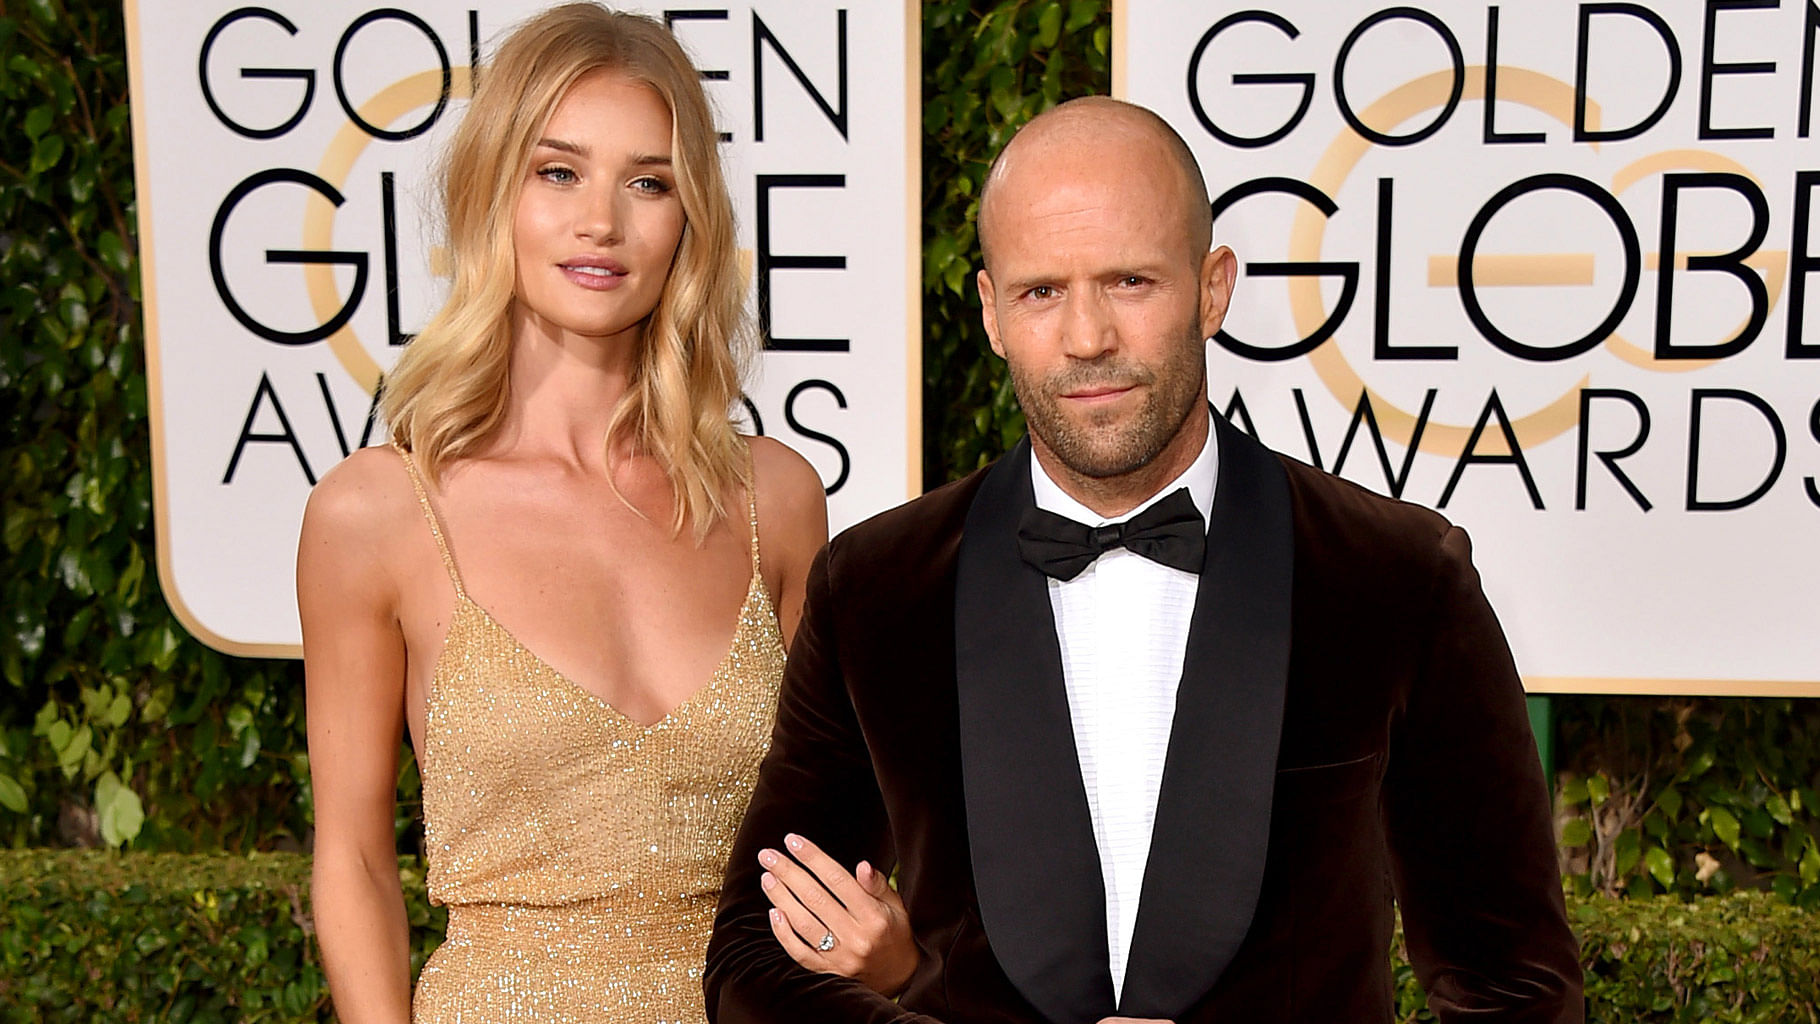 British model and actress Rosie Huntington-Whiteley, left, and Jason Statham arrive at the 73rd annual Golden Globe Awards in Los Angeles. (Photo: AP)&nbsp;